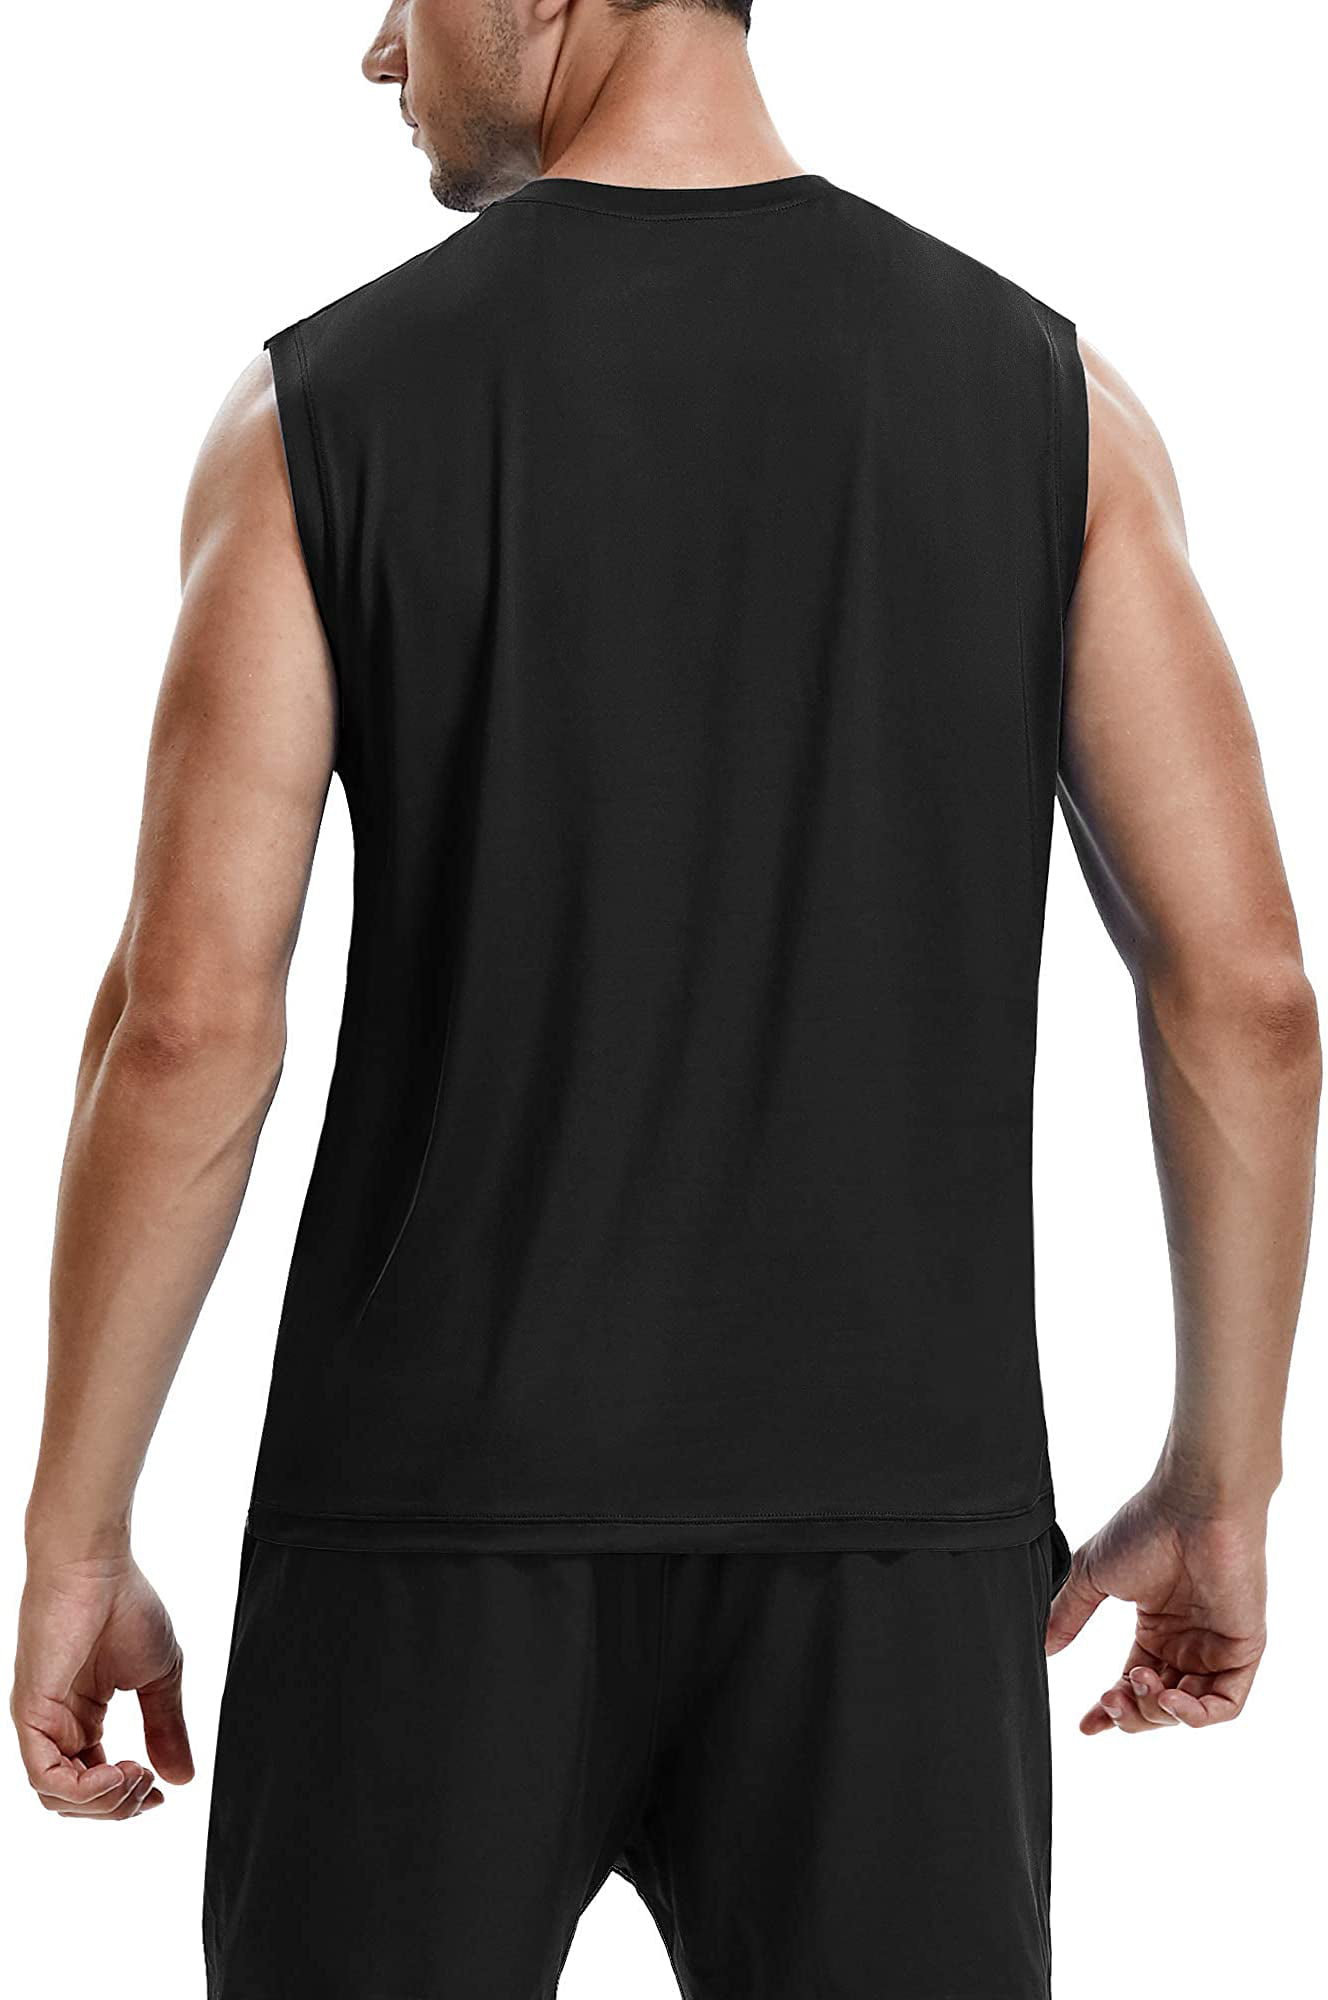 Roadbox Workout Sleeveless Shirts for Men Athletic Gym Basketball Quick Dry Muscle Tank Tops 